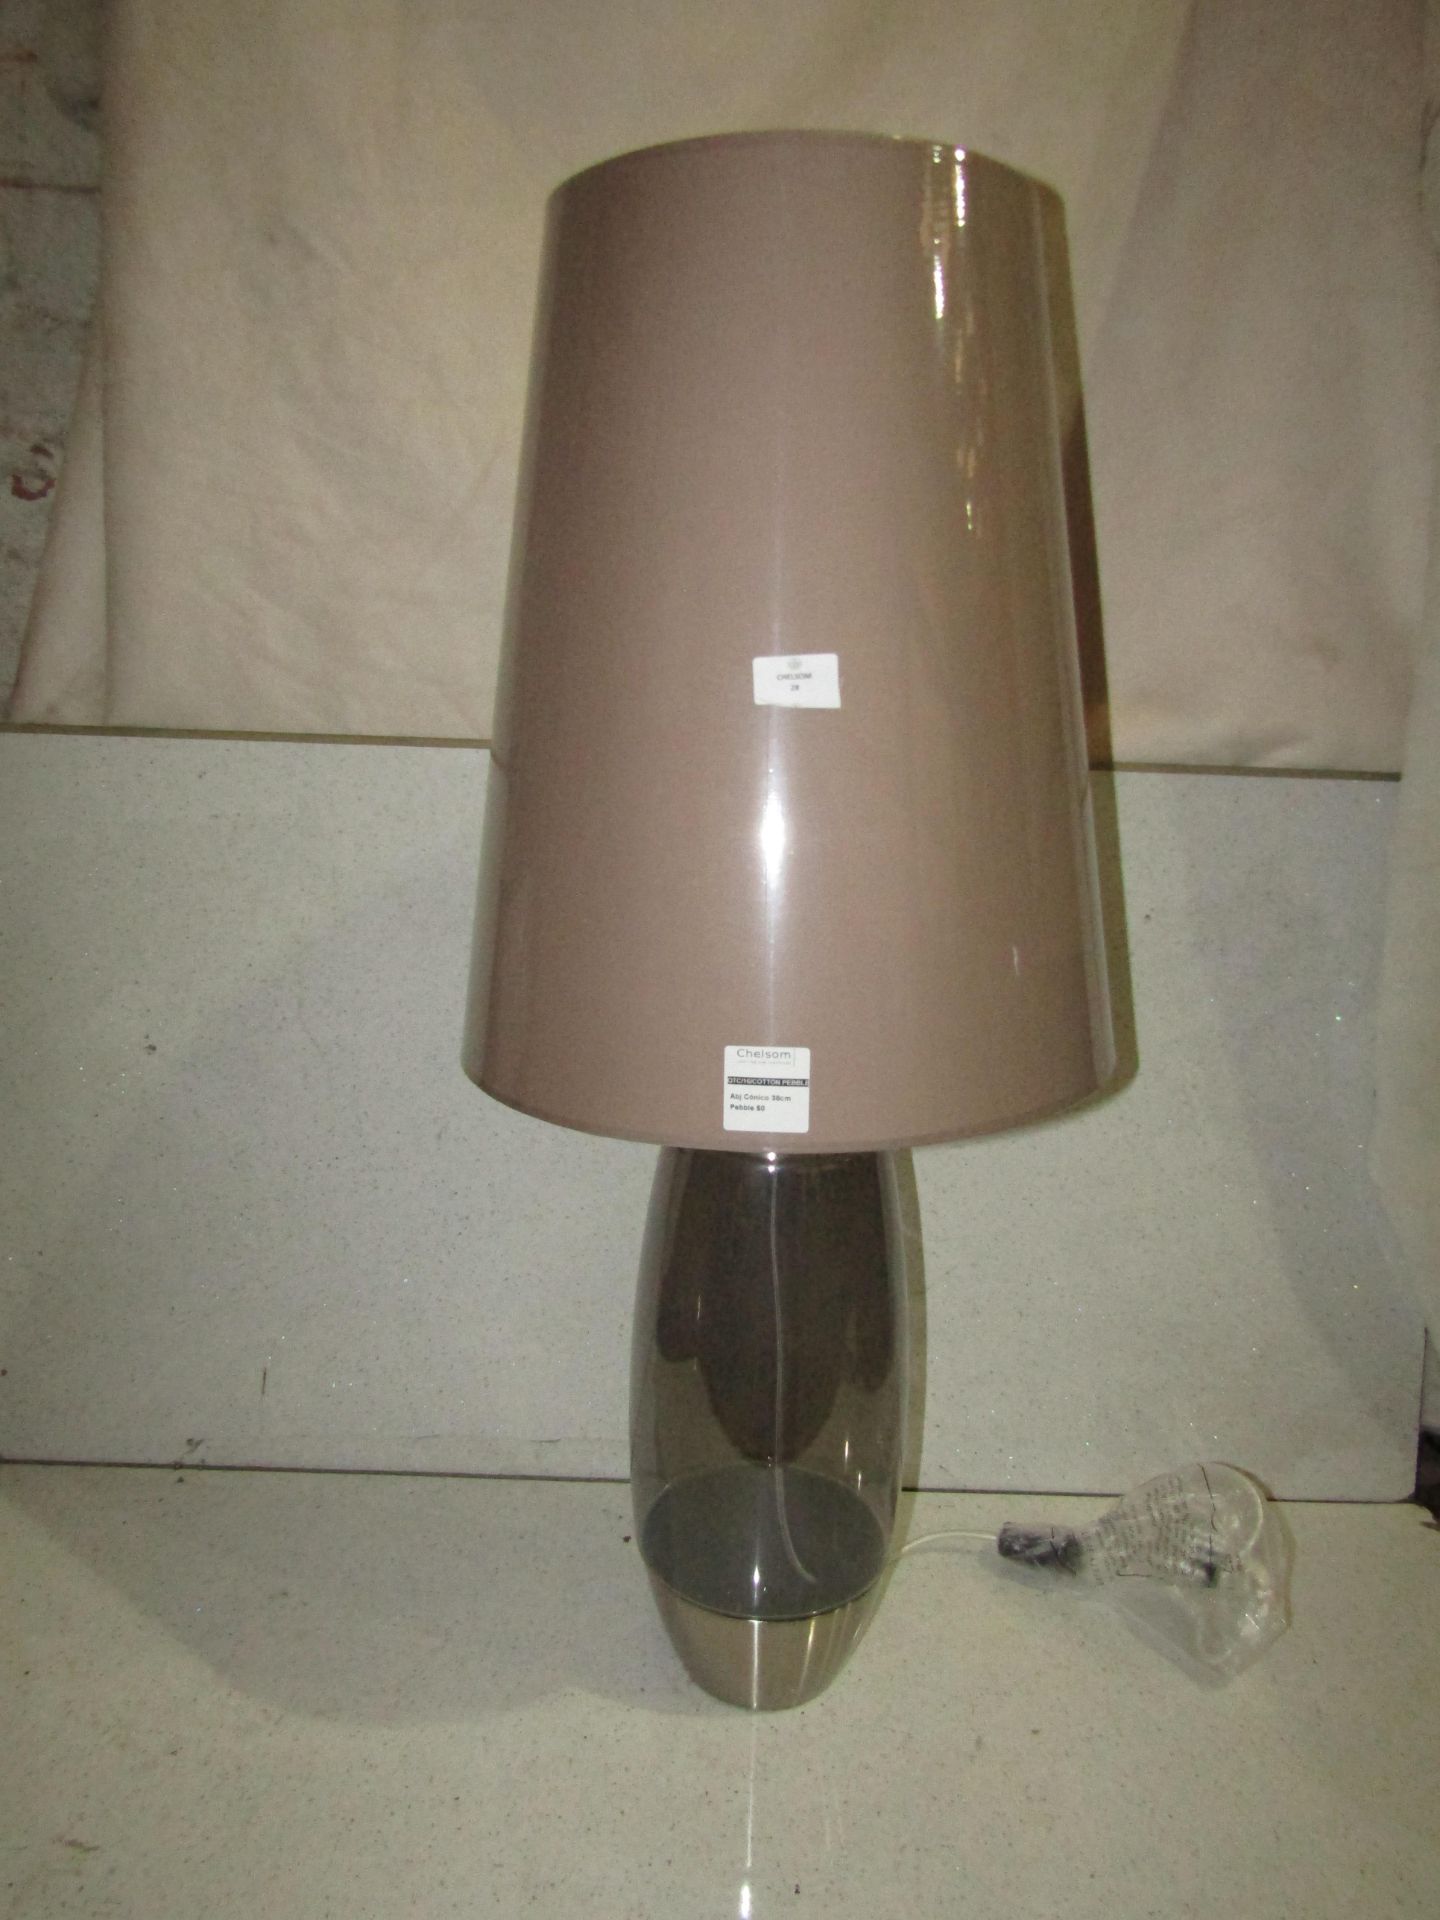 Pair of 2 Chelsom - Stockholm Table Lamp With Pebble 38cm Shade - SK/26/BN - New & Boxed.